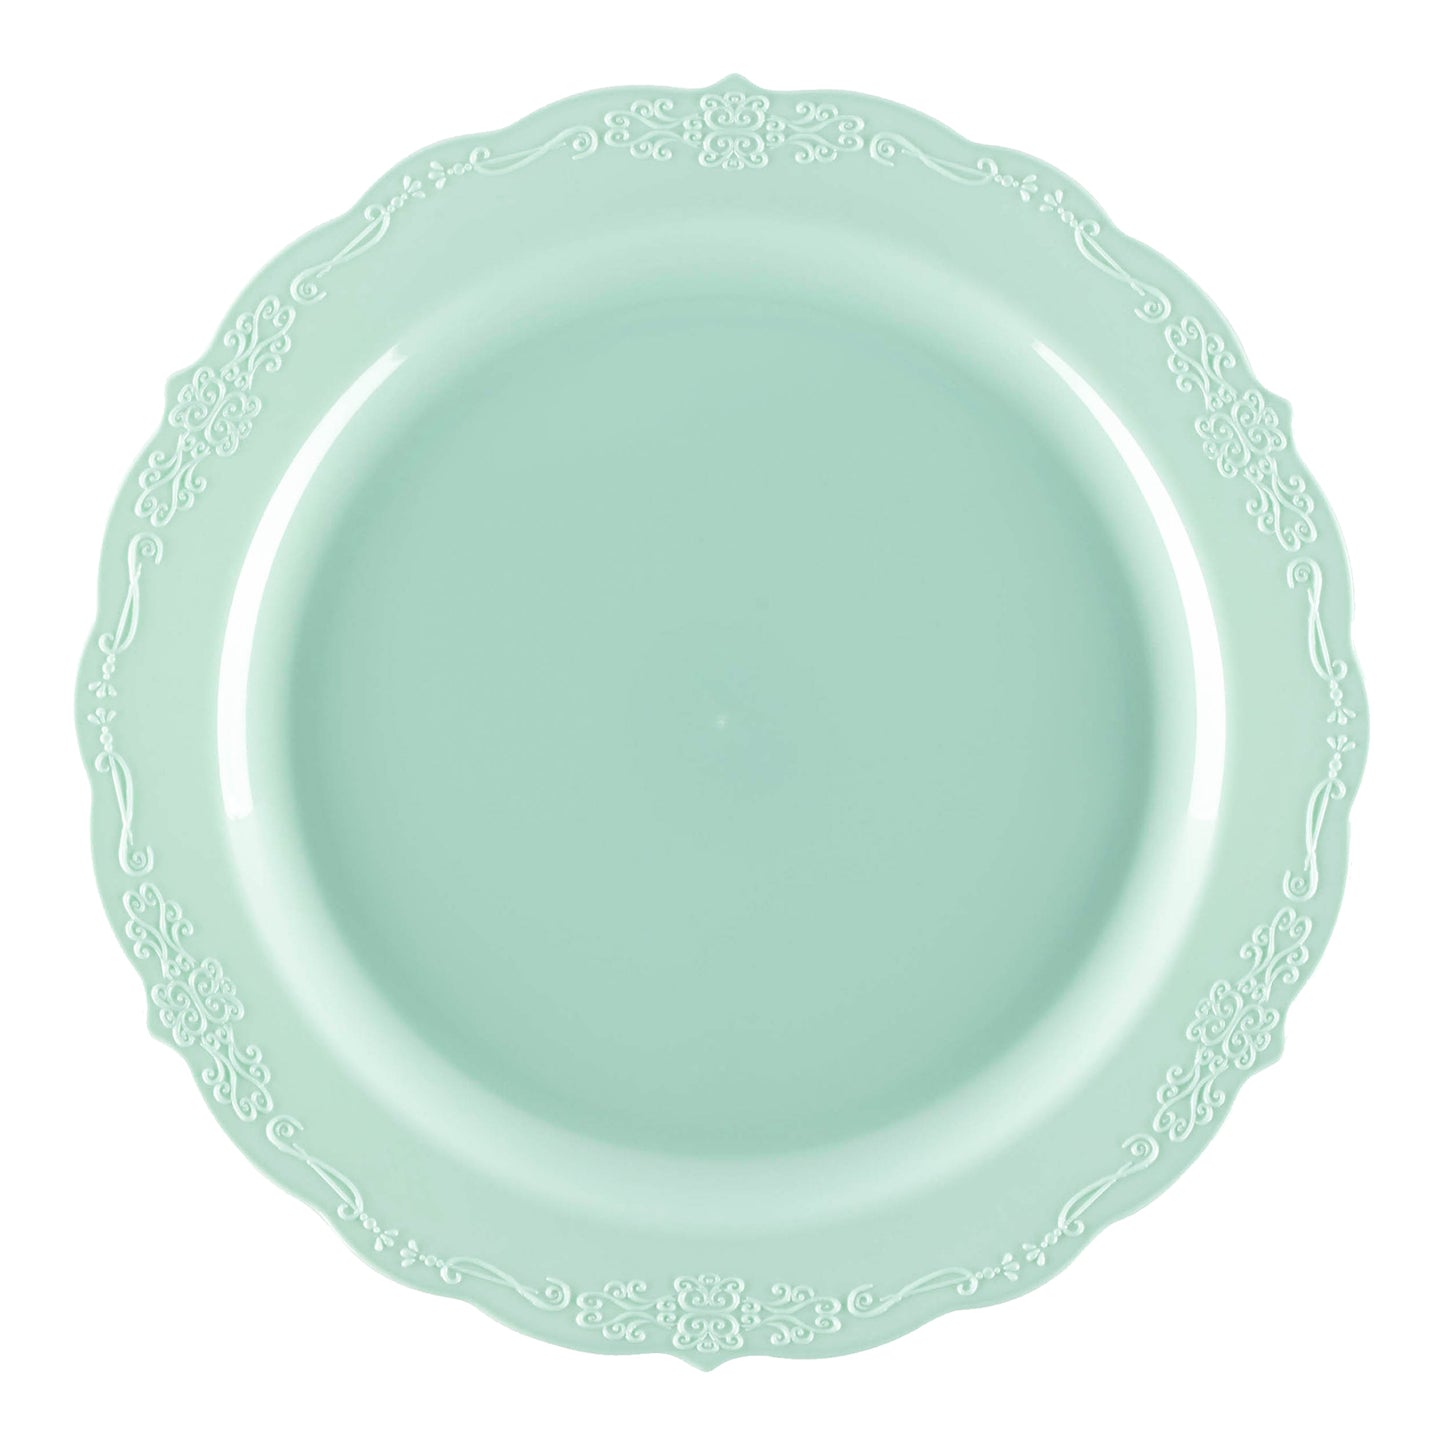 Turquoise Vintage Round Disposable Plastic Appetizer/Salad Plates (7.5") | The Kaya Collection